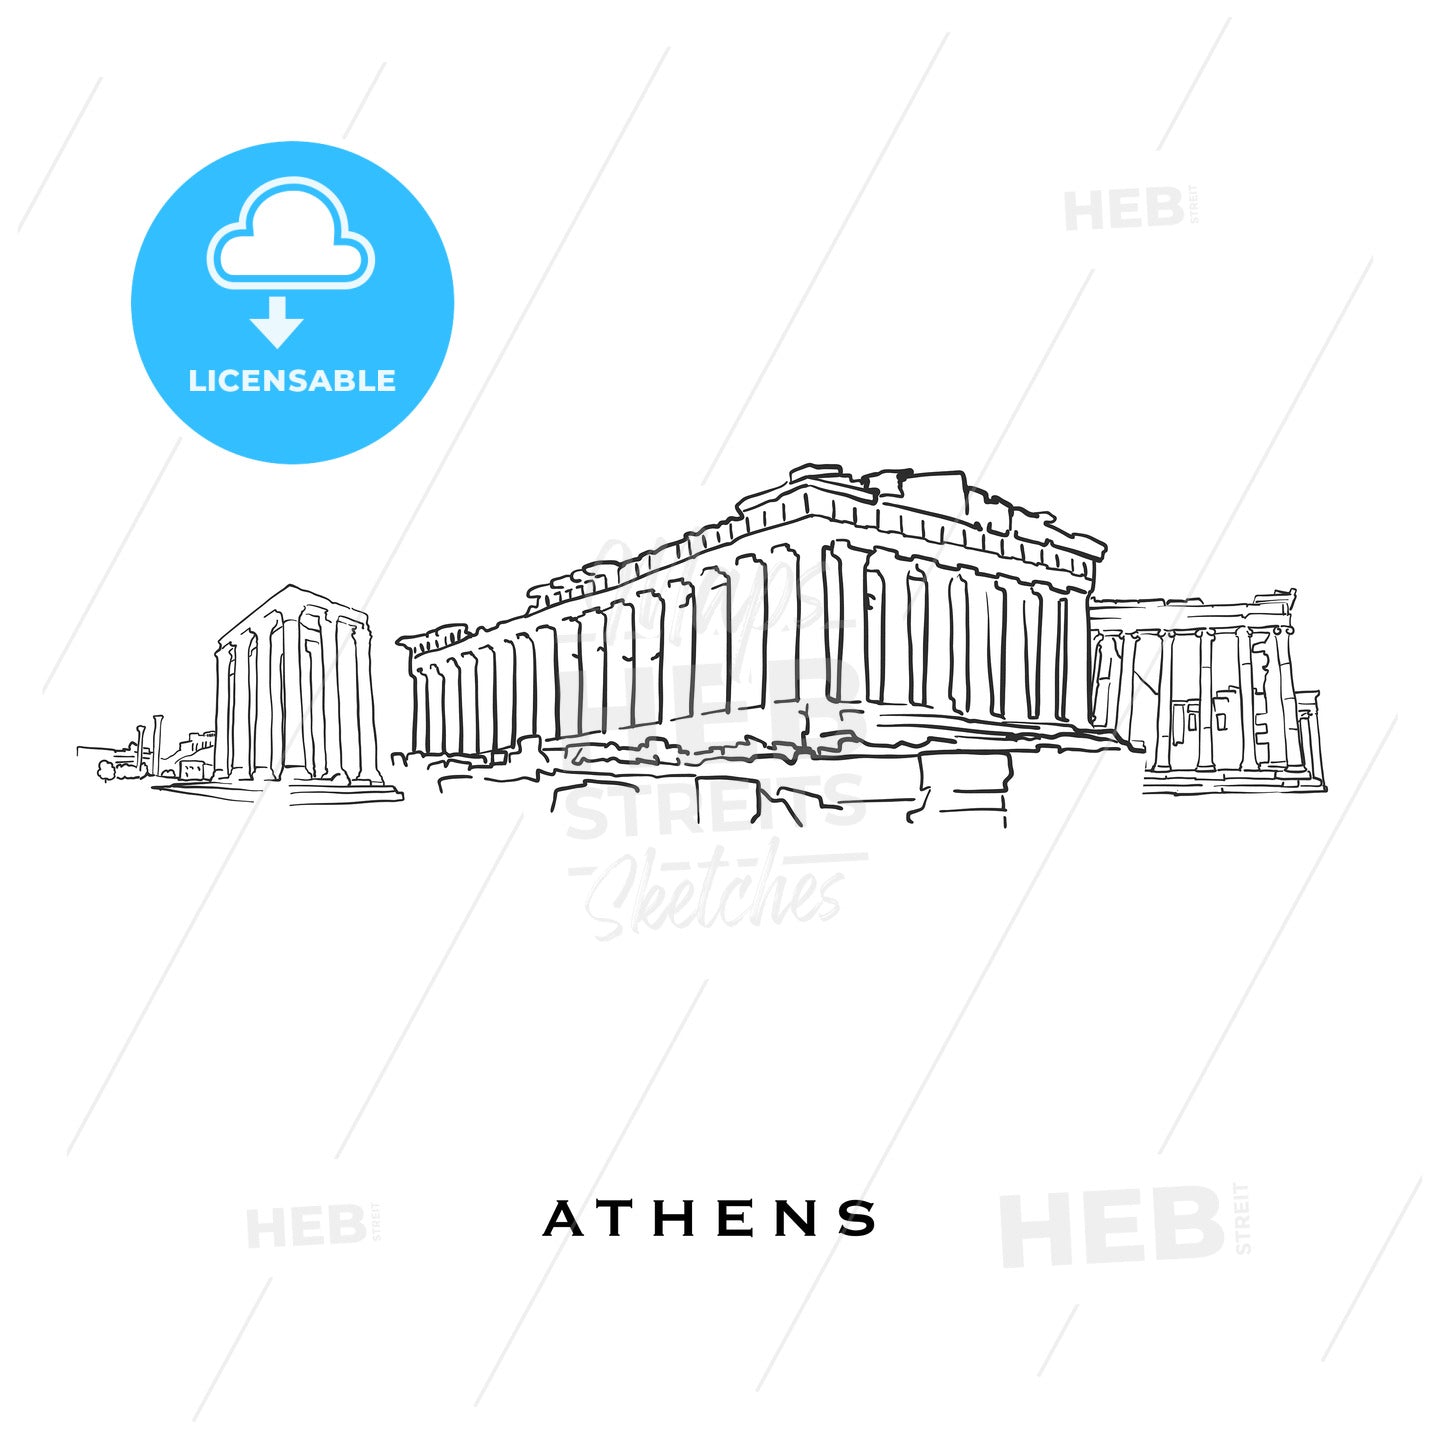 Athens Greece famous architecture – instant download